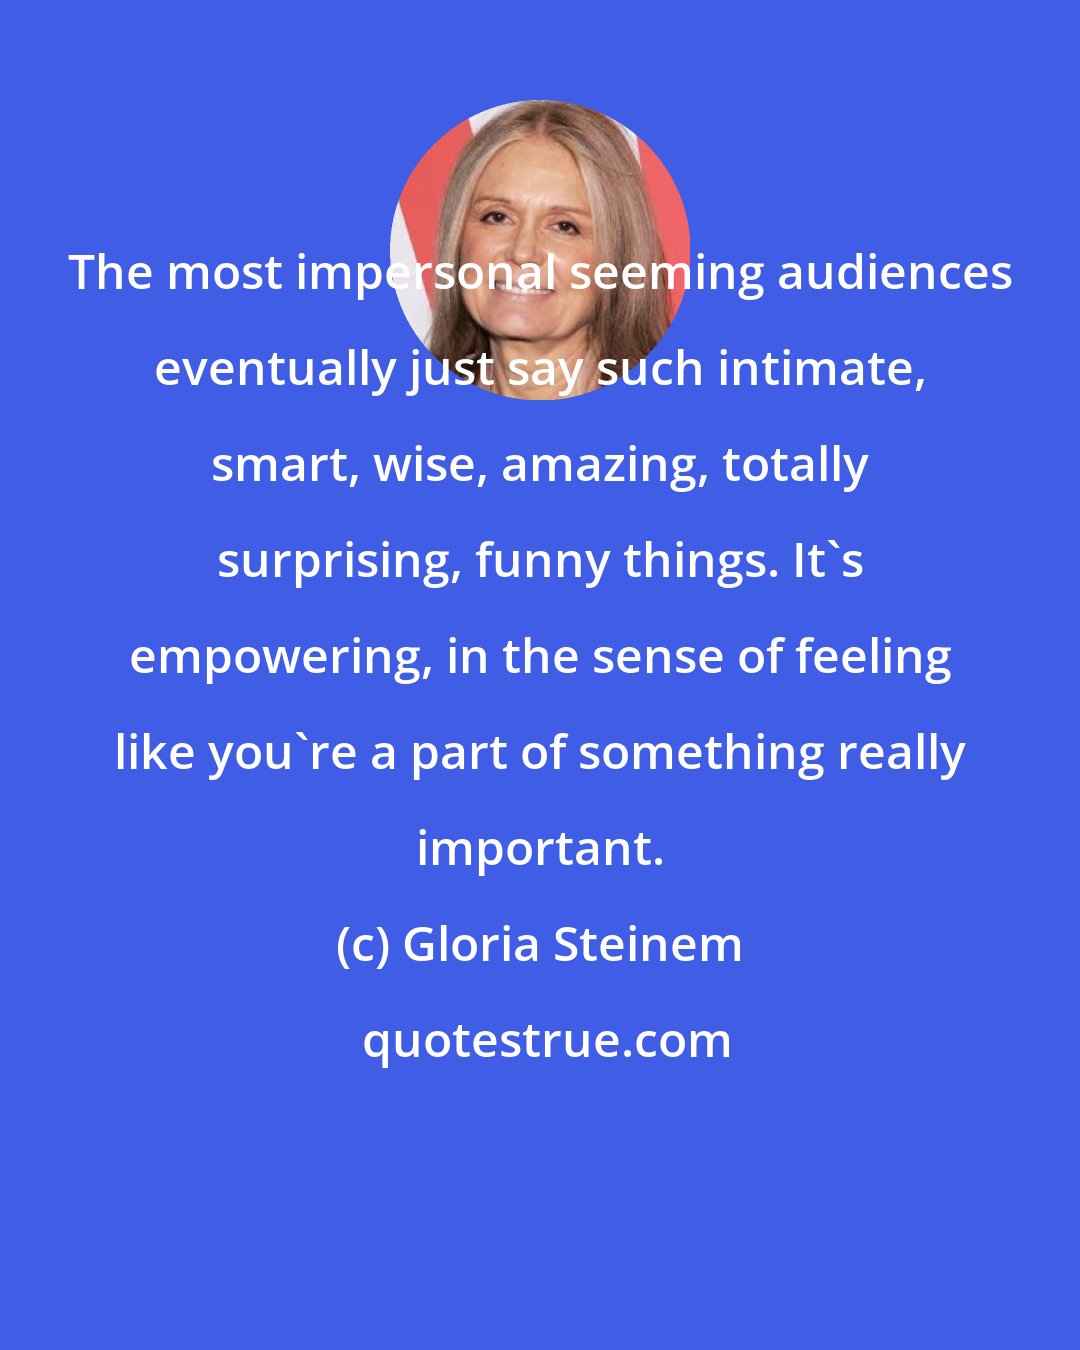 Gloria Steinem: The most impersonal seeming audiences eventually just say such intimate, smart, wise, amazing, totally surprising, funny things. It's empowering, in the sense of feeling like you're a part of something really important.